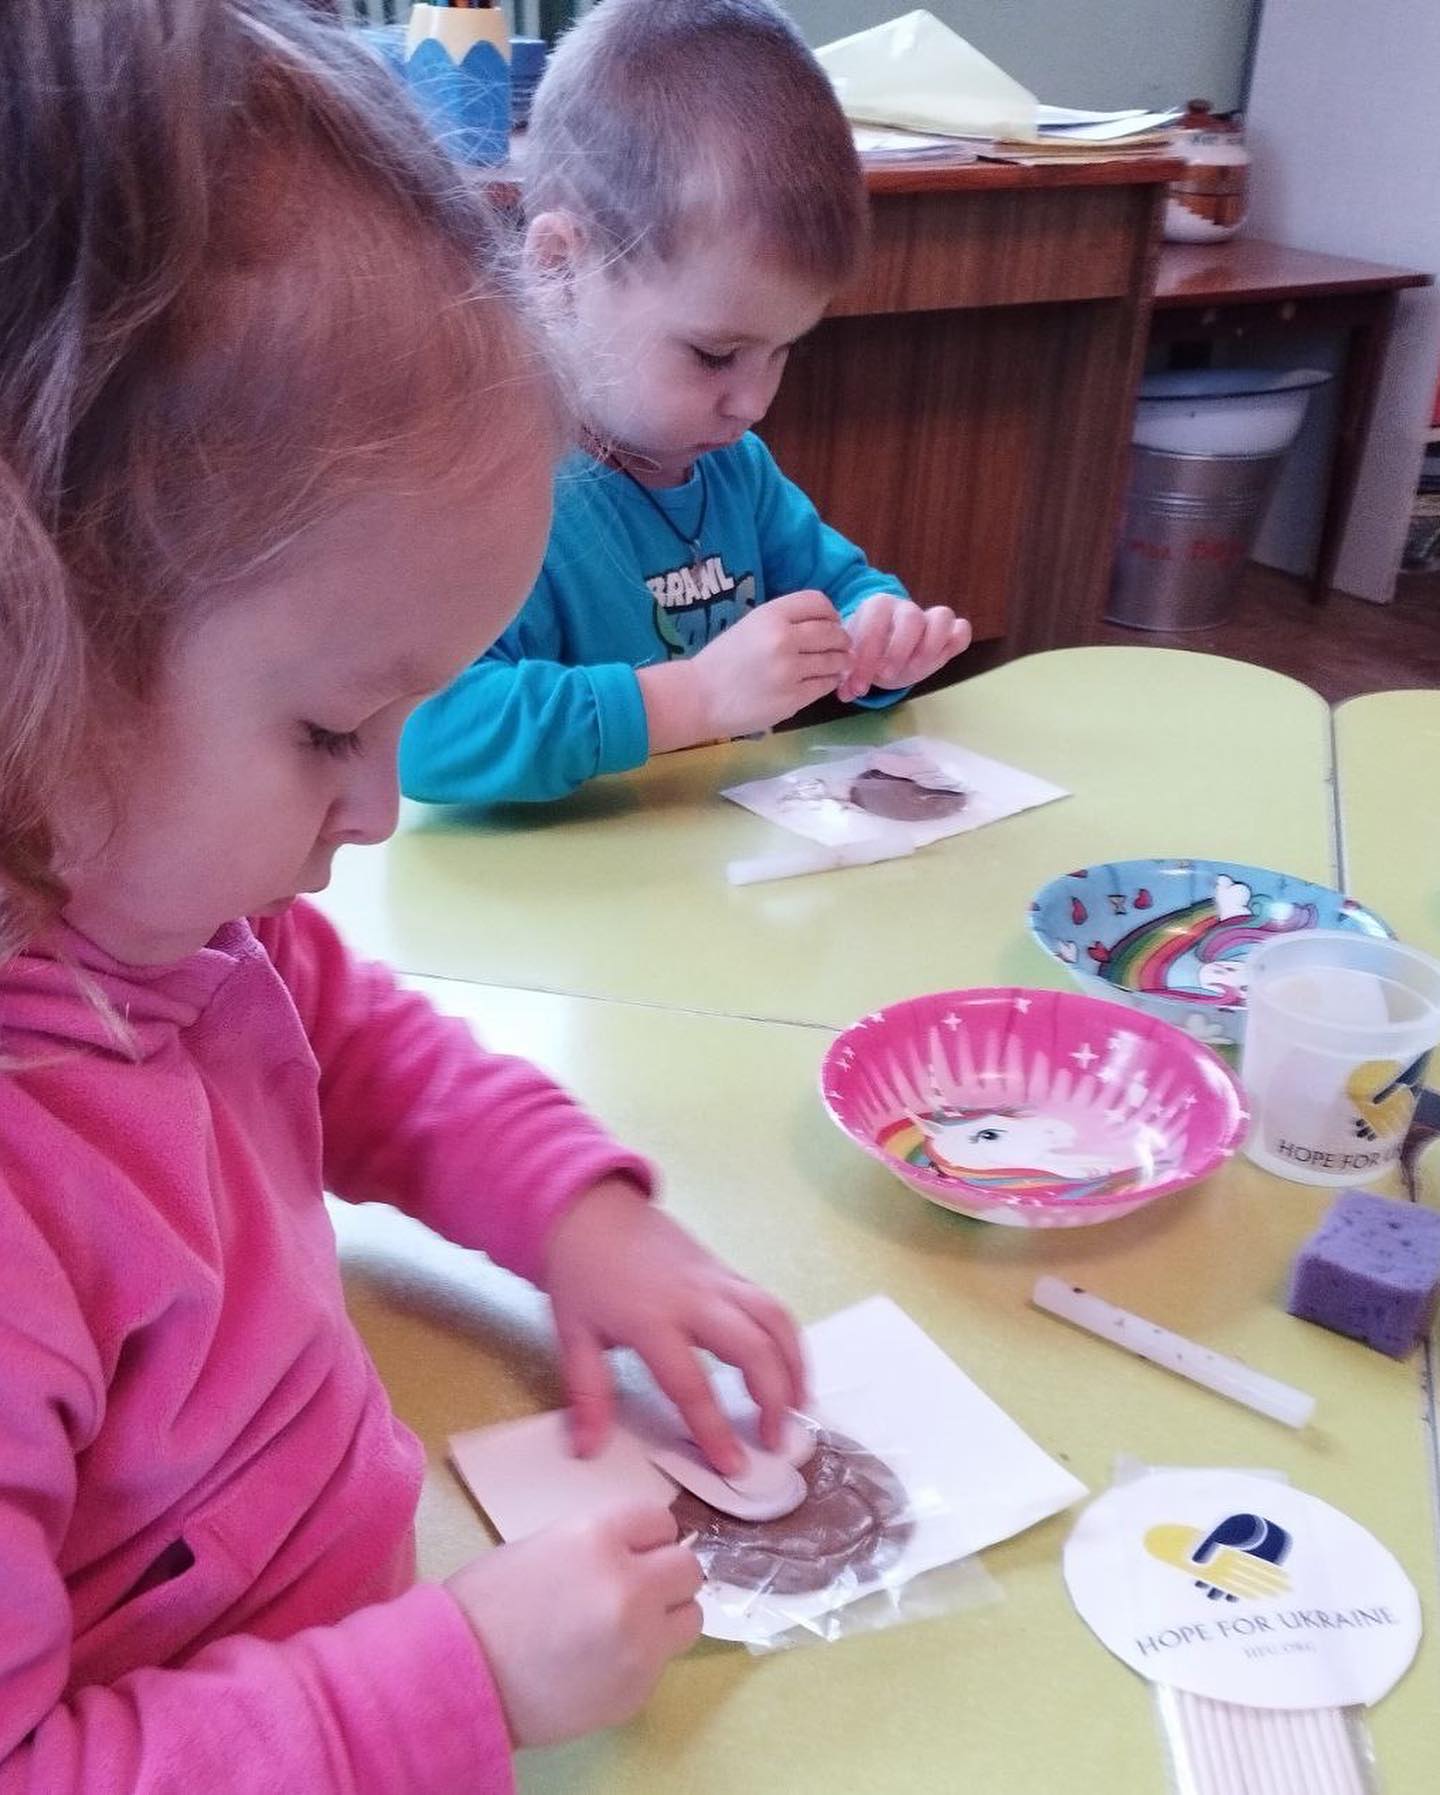 Two children are making crafts at a table.